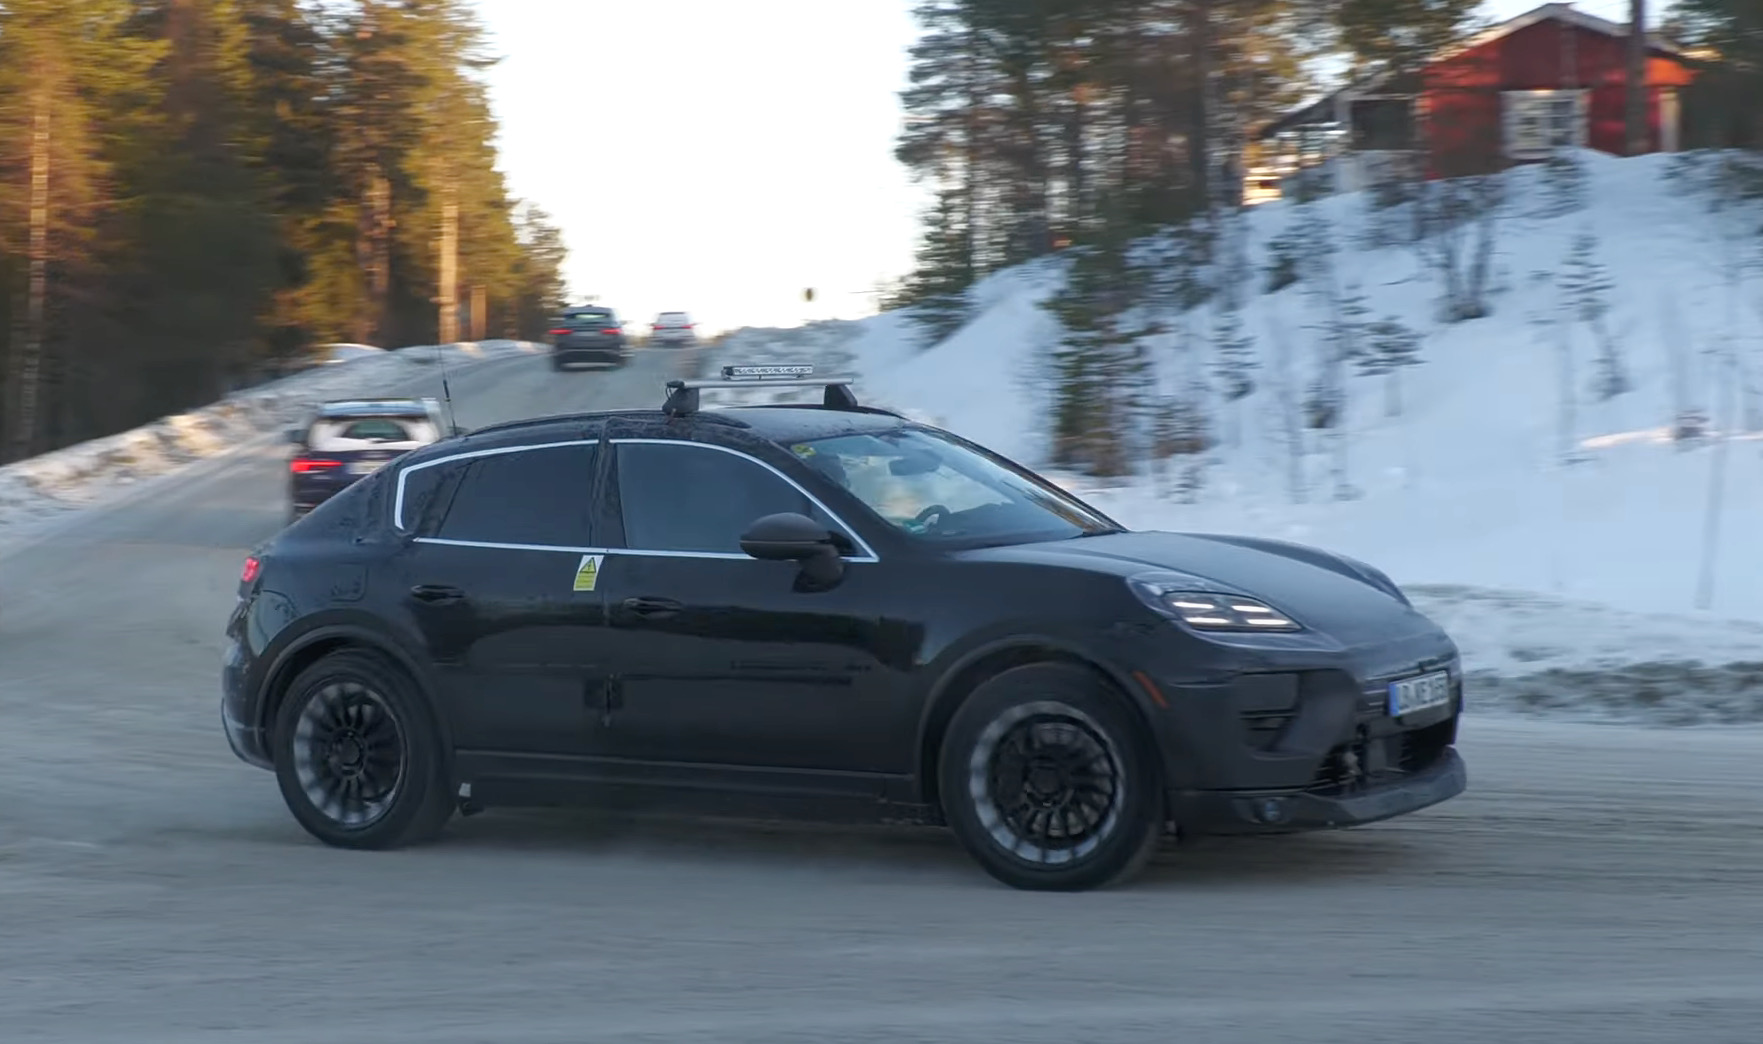 2023 Porsche Macan electric prototypes spotted, extreme winter testing (video)